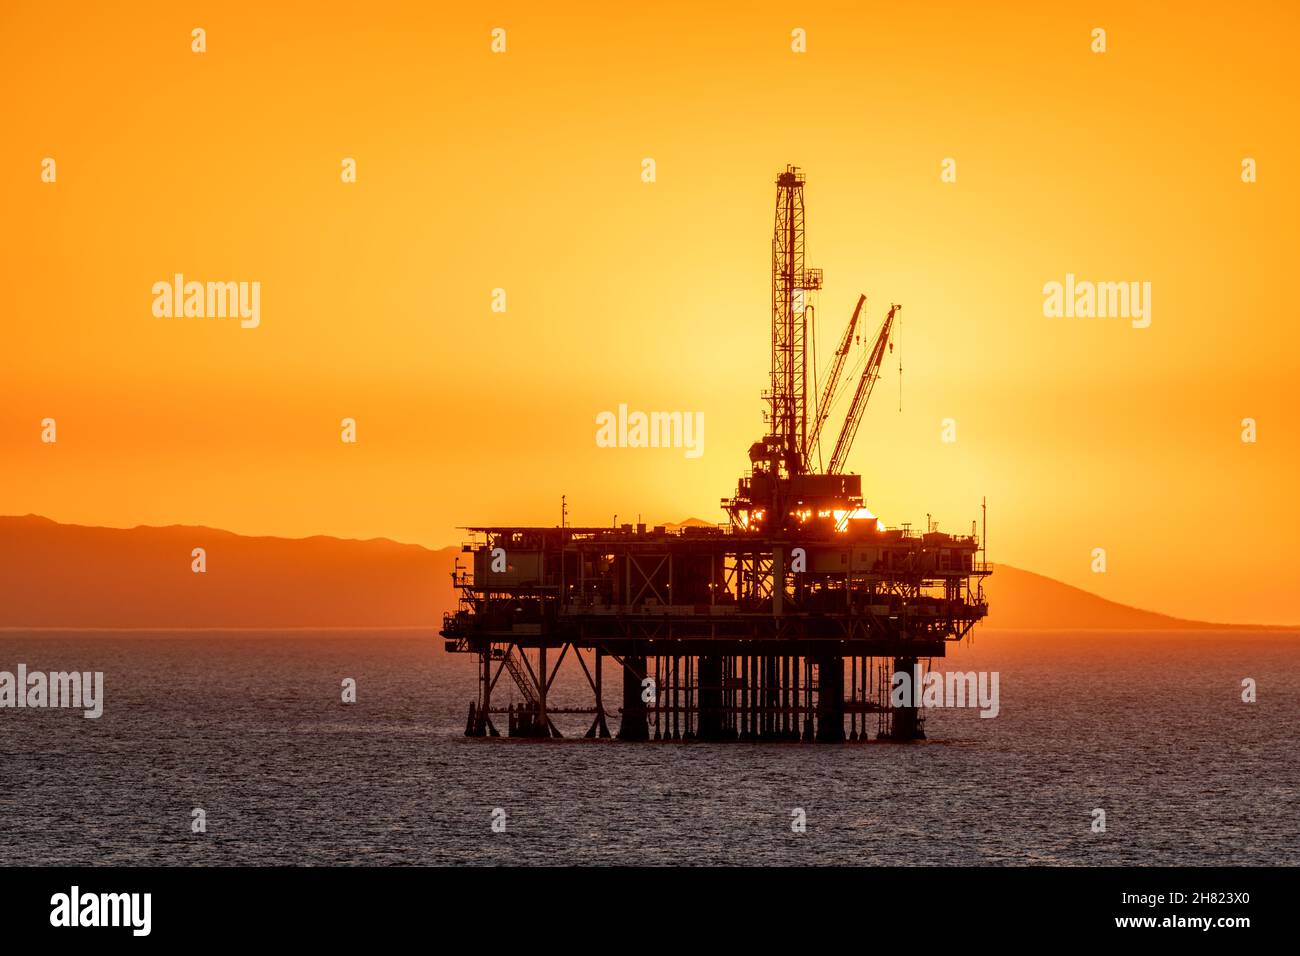 Offshore oil platform off the coast of California against a moody, orange sky as the sun sets behind the rig. Stock Photo